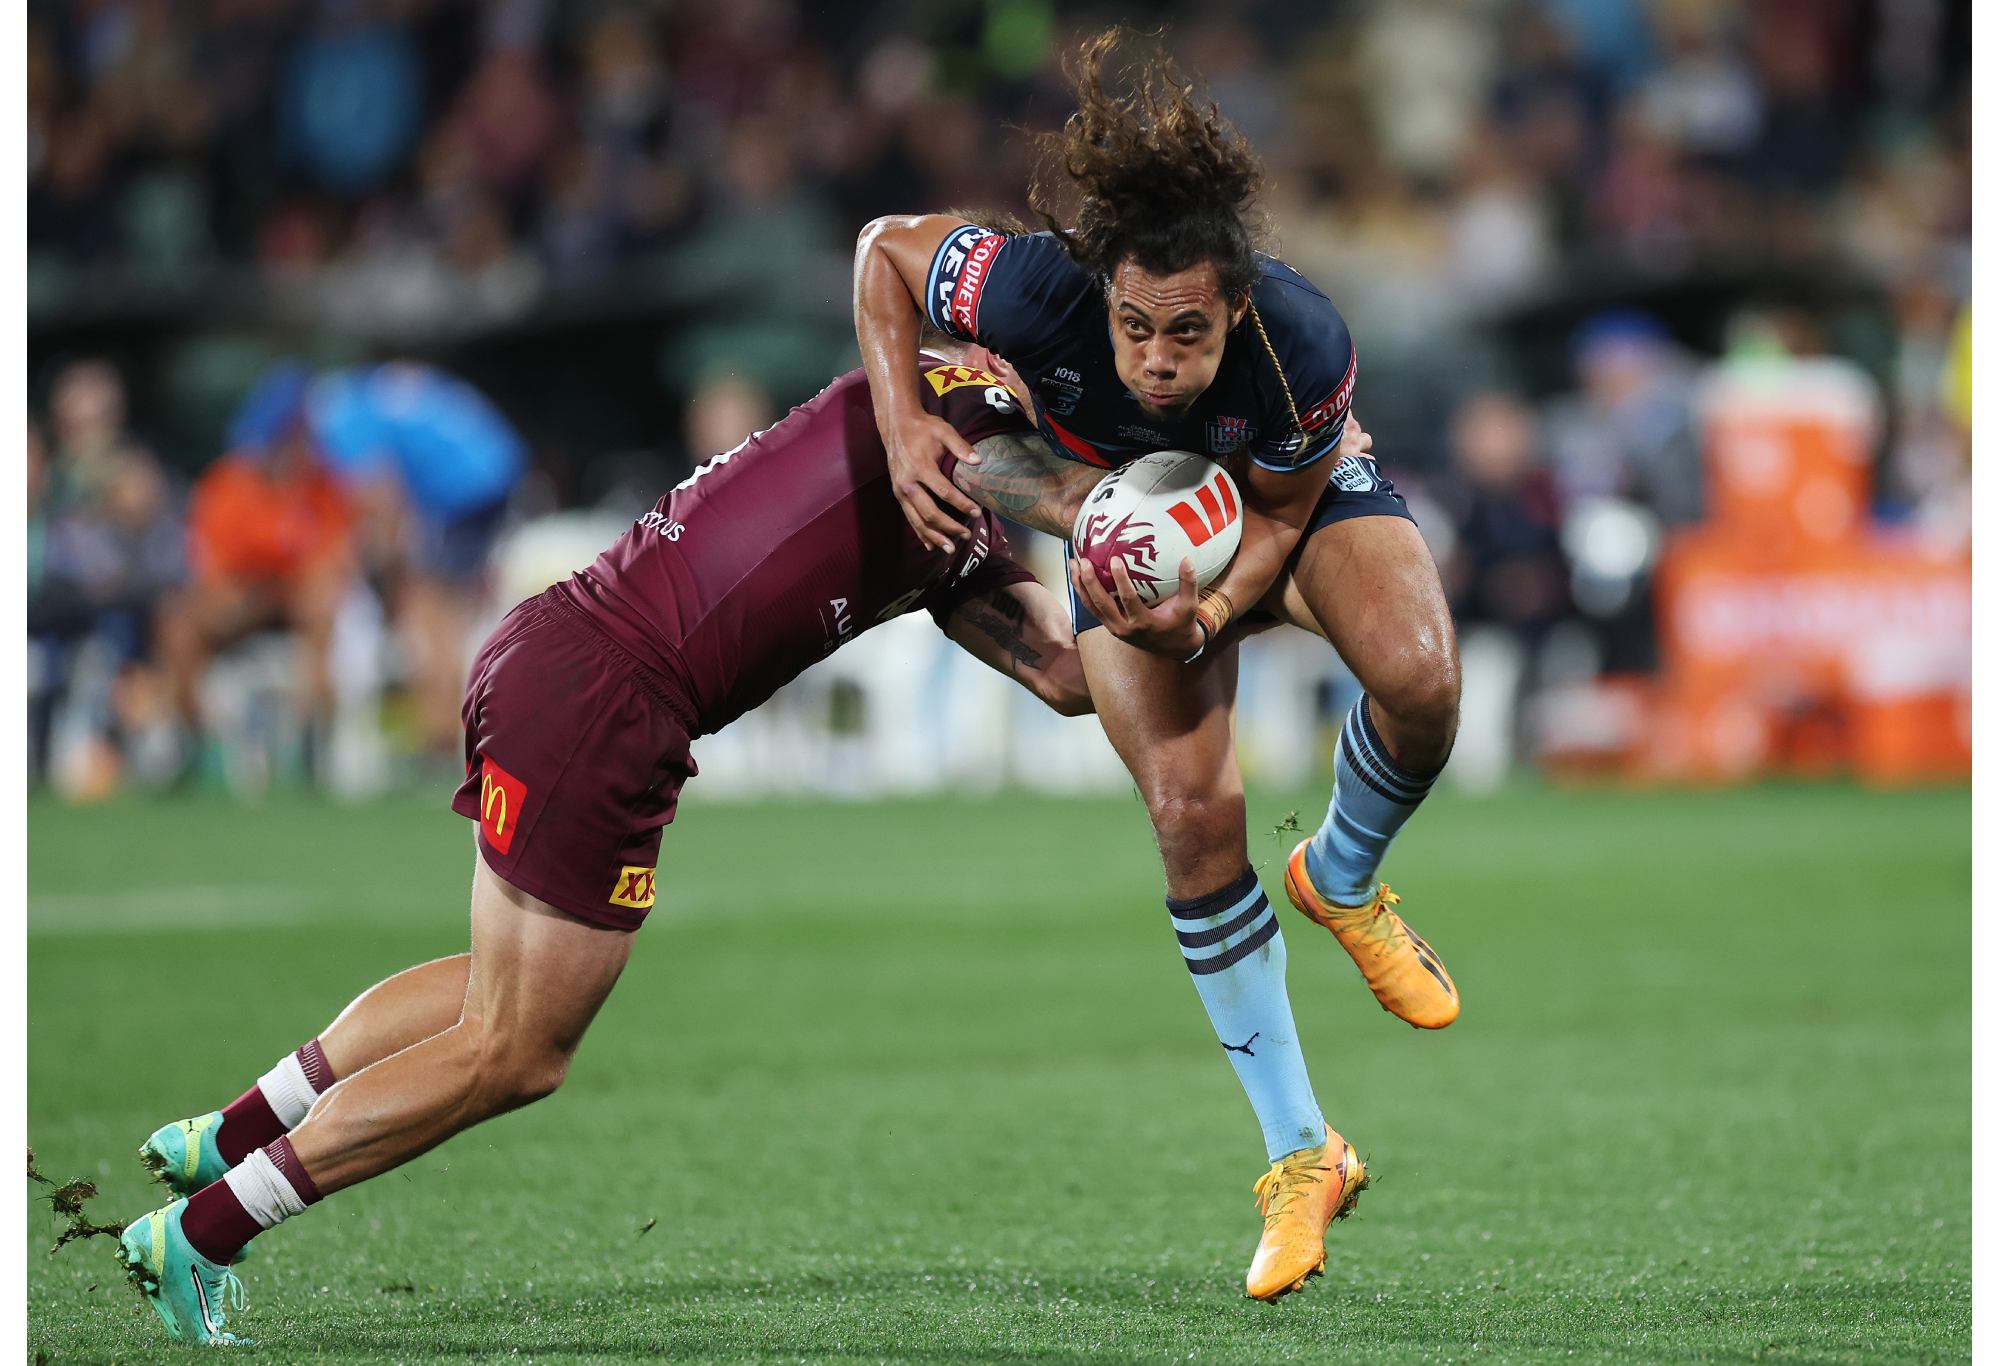 ADELAIDE, AUSTRALIA - MAY 31: Jarome Luai of the Blues is tackled by Cameron Munster of the Maroons during game one of the 2023 State of Origin series between the Queensland Maroons and New South Wales Blues at Adelaide Oval on May 31, 2023 in Adelaide, Australia. (Photo by Mark Kolbe/Getty Images)